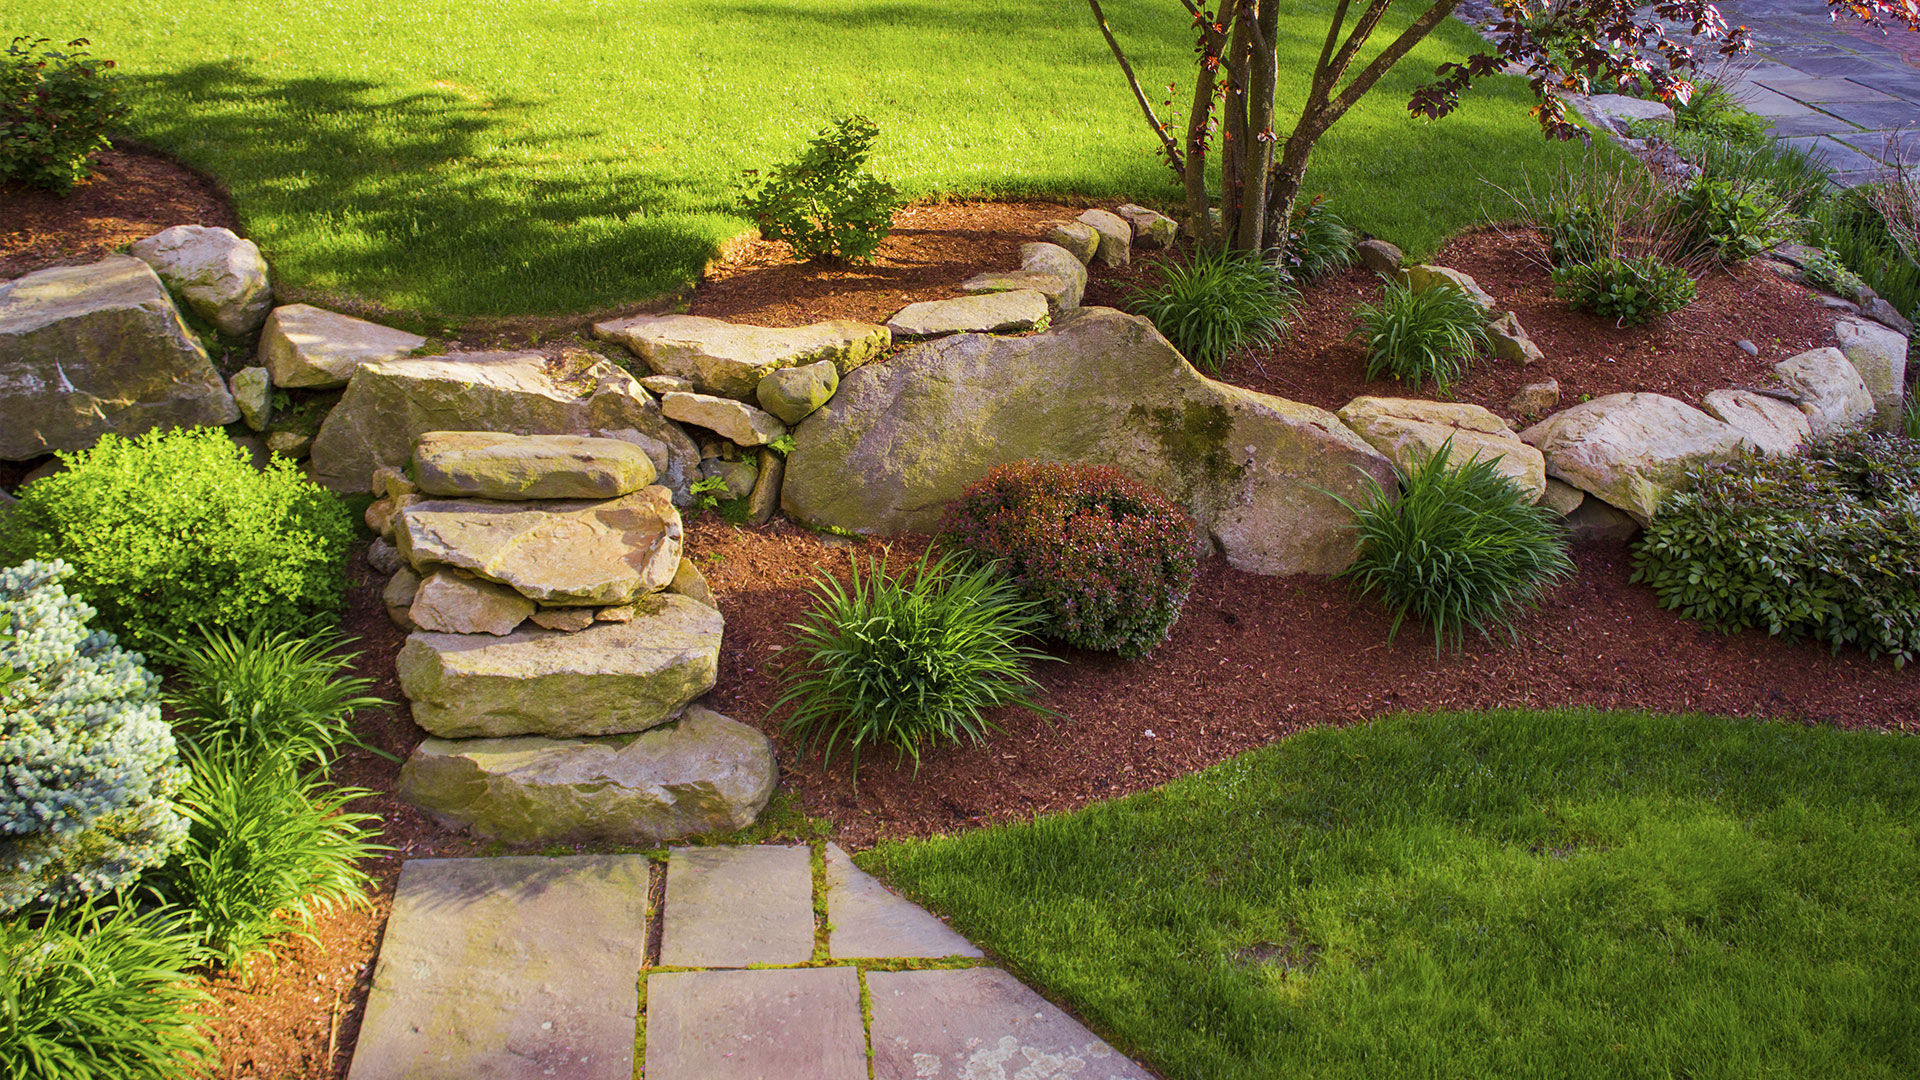 Tree Services, Irrigation and Landscape Design in McKinney, Plano ...